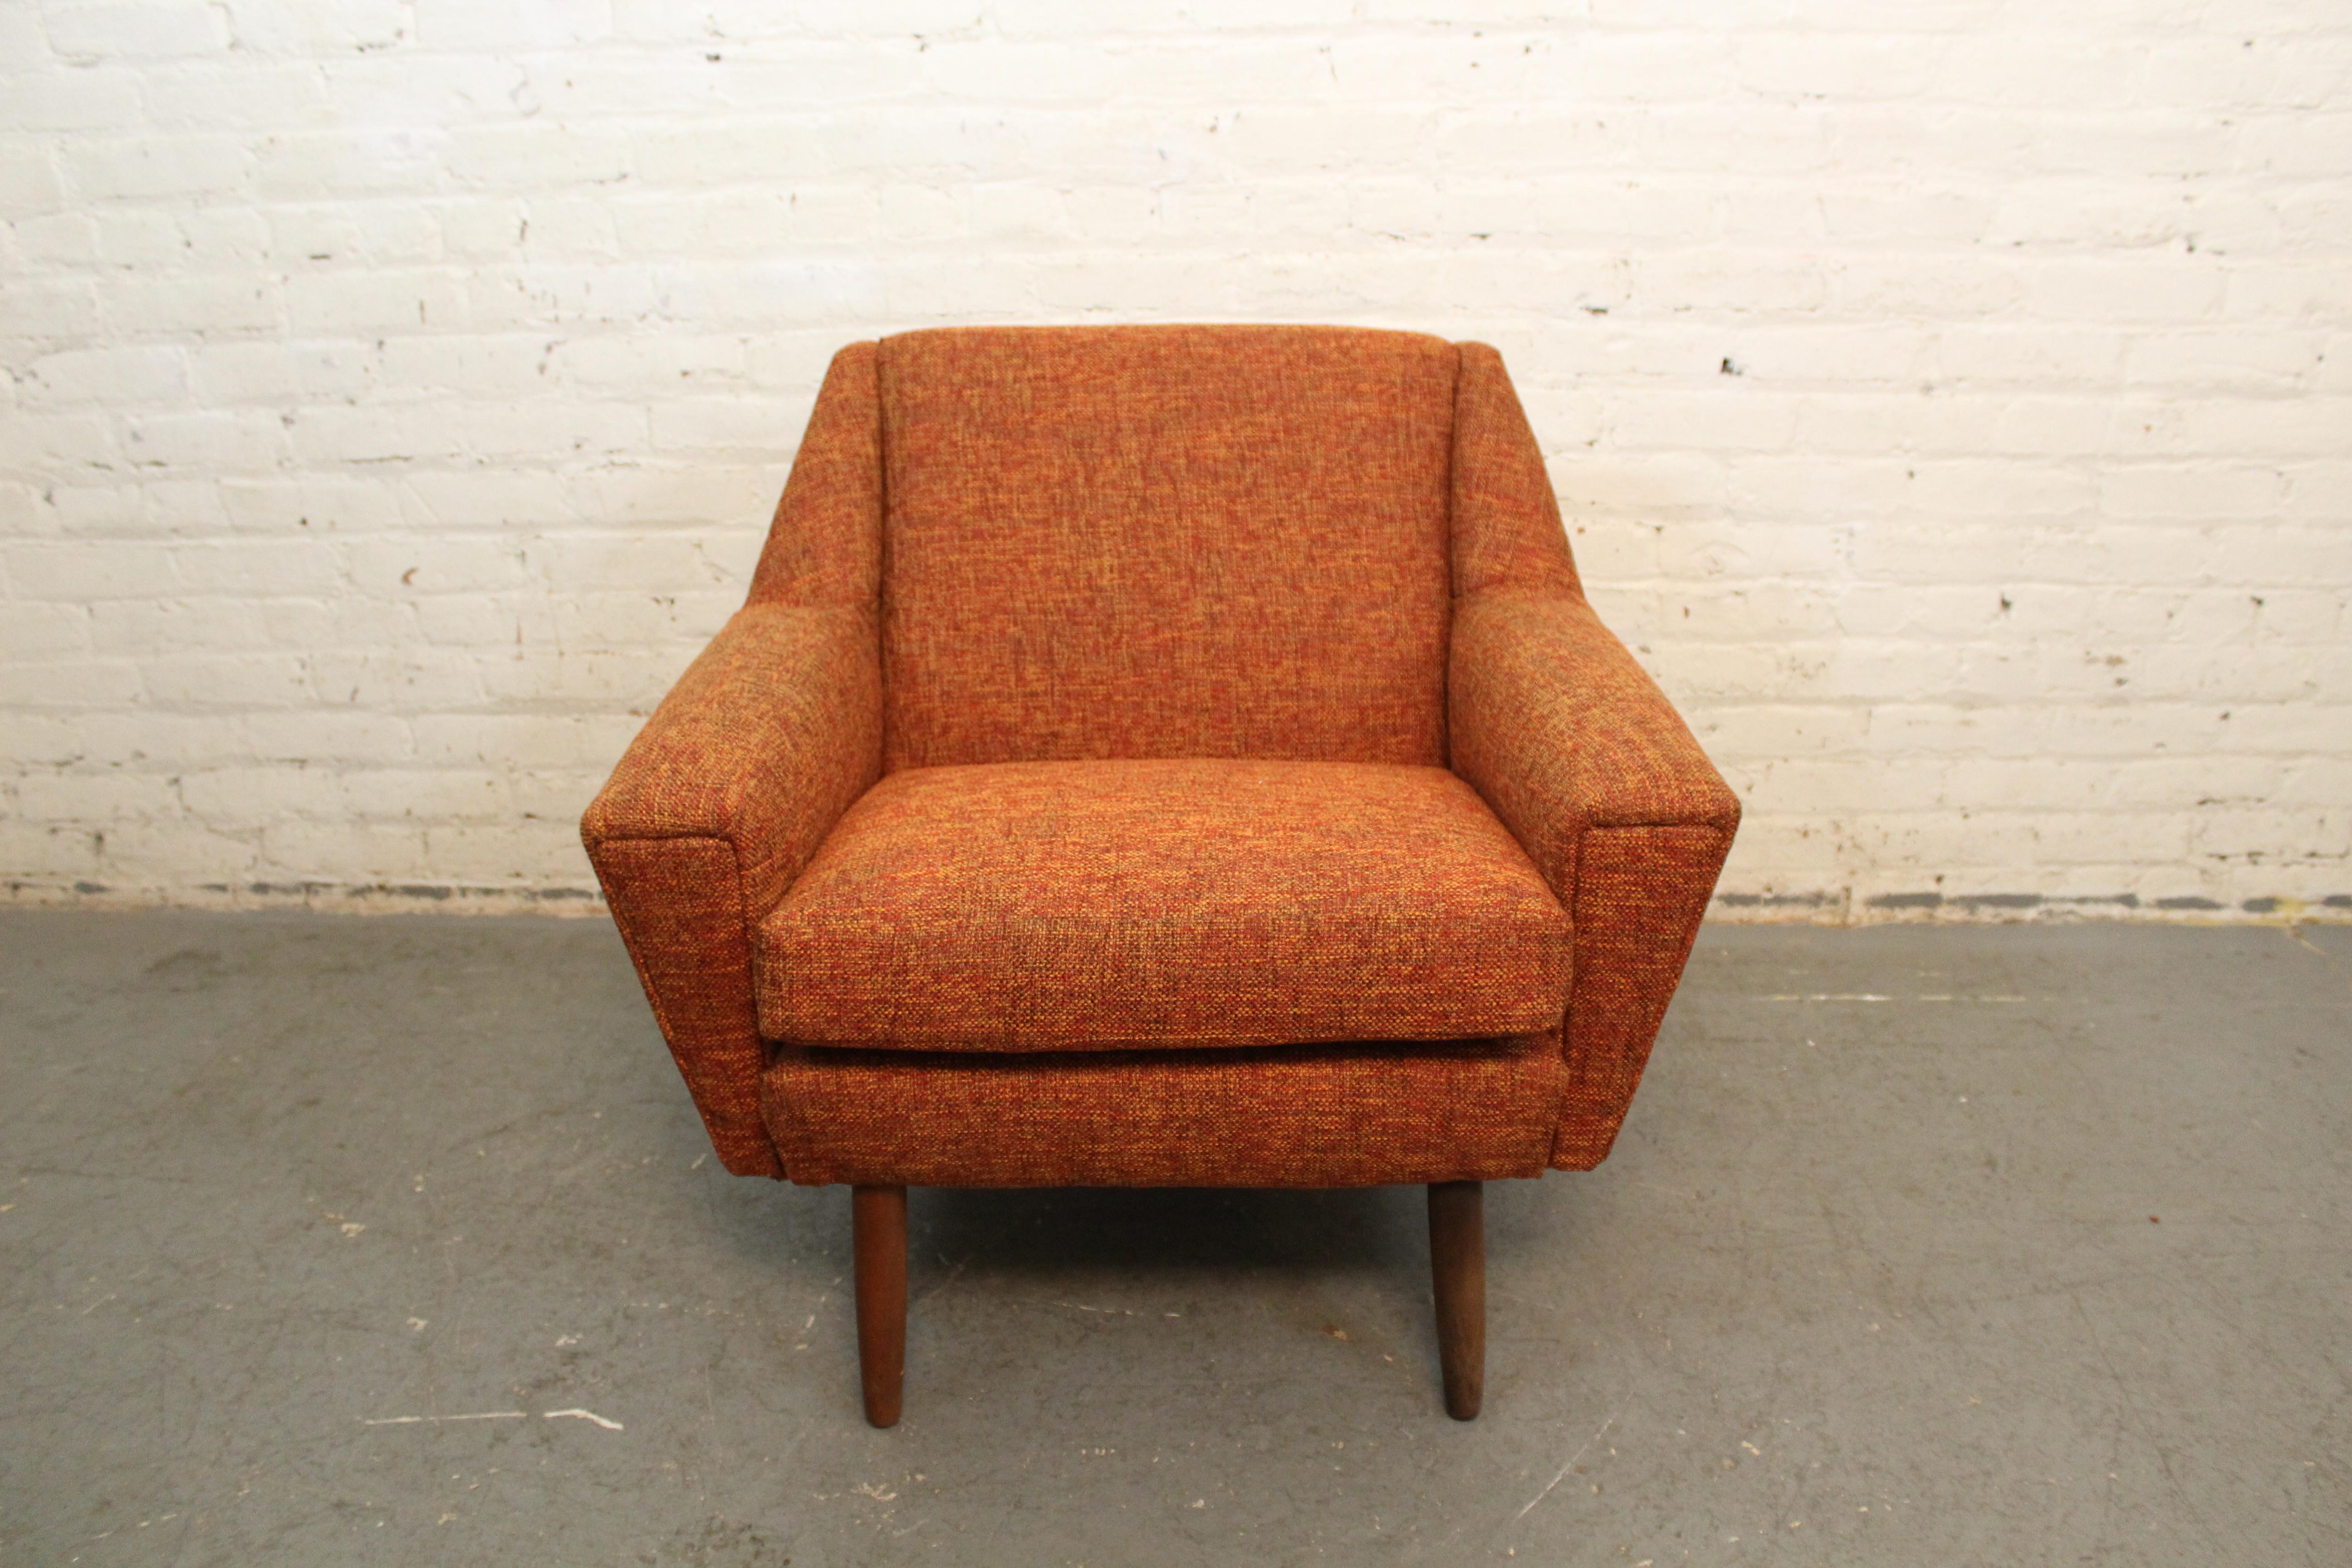 Don't miss out on this wonderfully unusual mid-century Scandinavian club chair! Featuring a unique geometric shape and boasting angles that are both obtuse and acute, this funky seat is sure to be a head-turner in any setting! Freshly arrived from